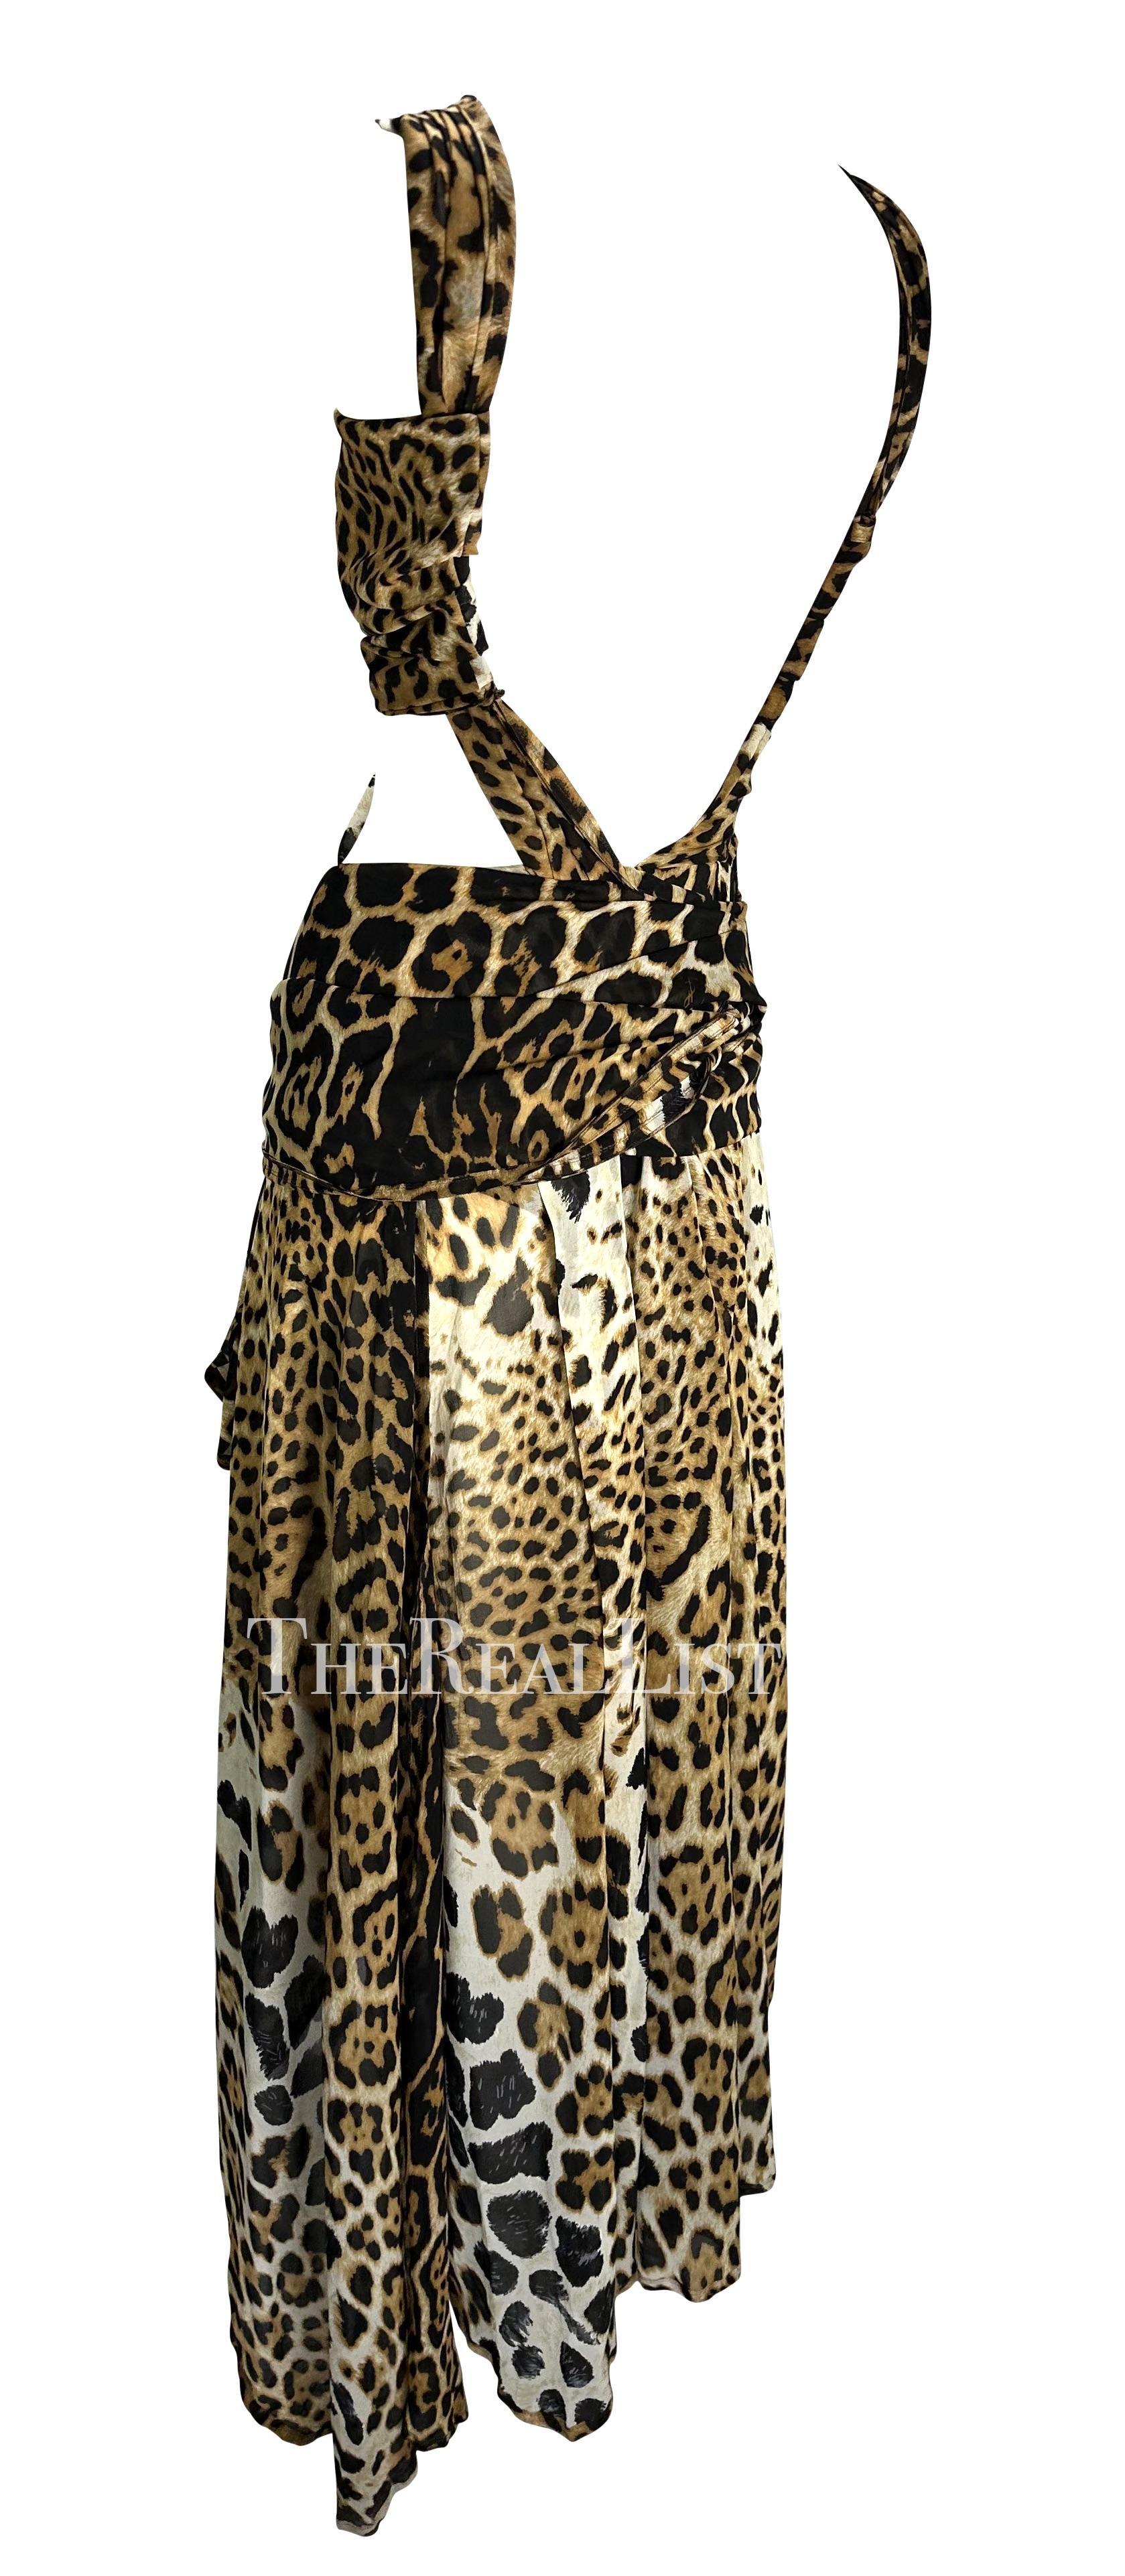 S/S 2002 Yves Saint Laurent by Tom Ford Runway Cheetah Print Chiffon Wrap Gown For Sale 5